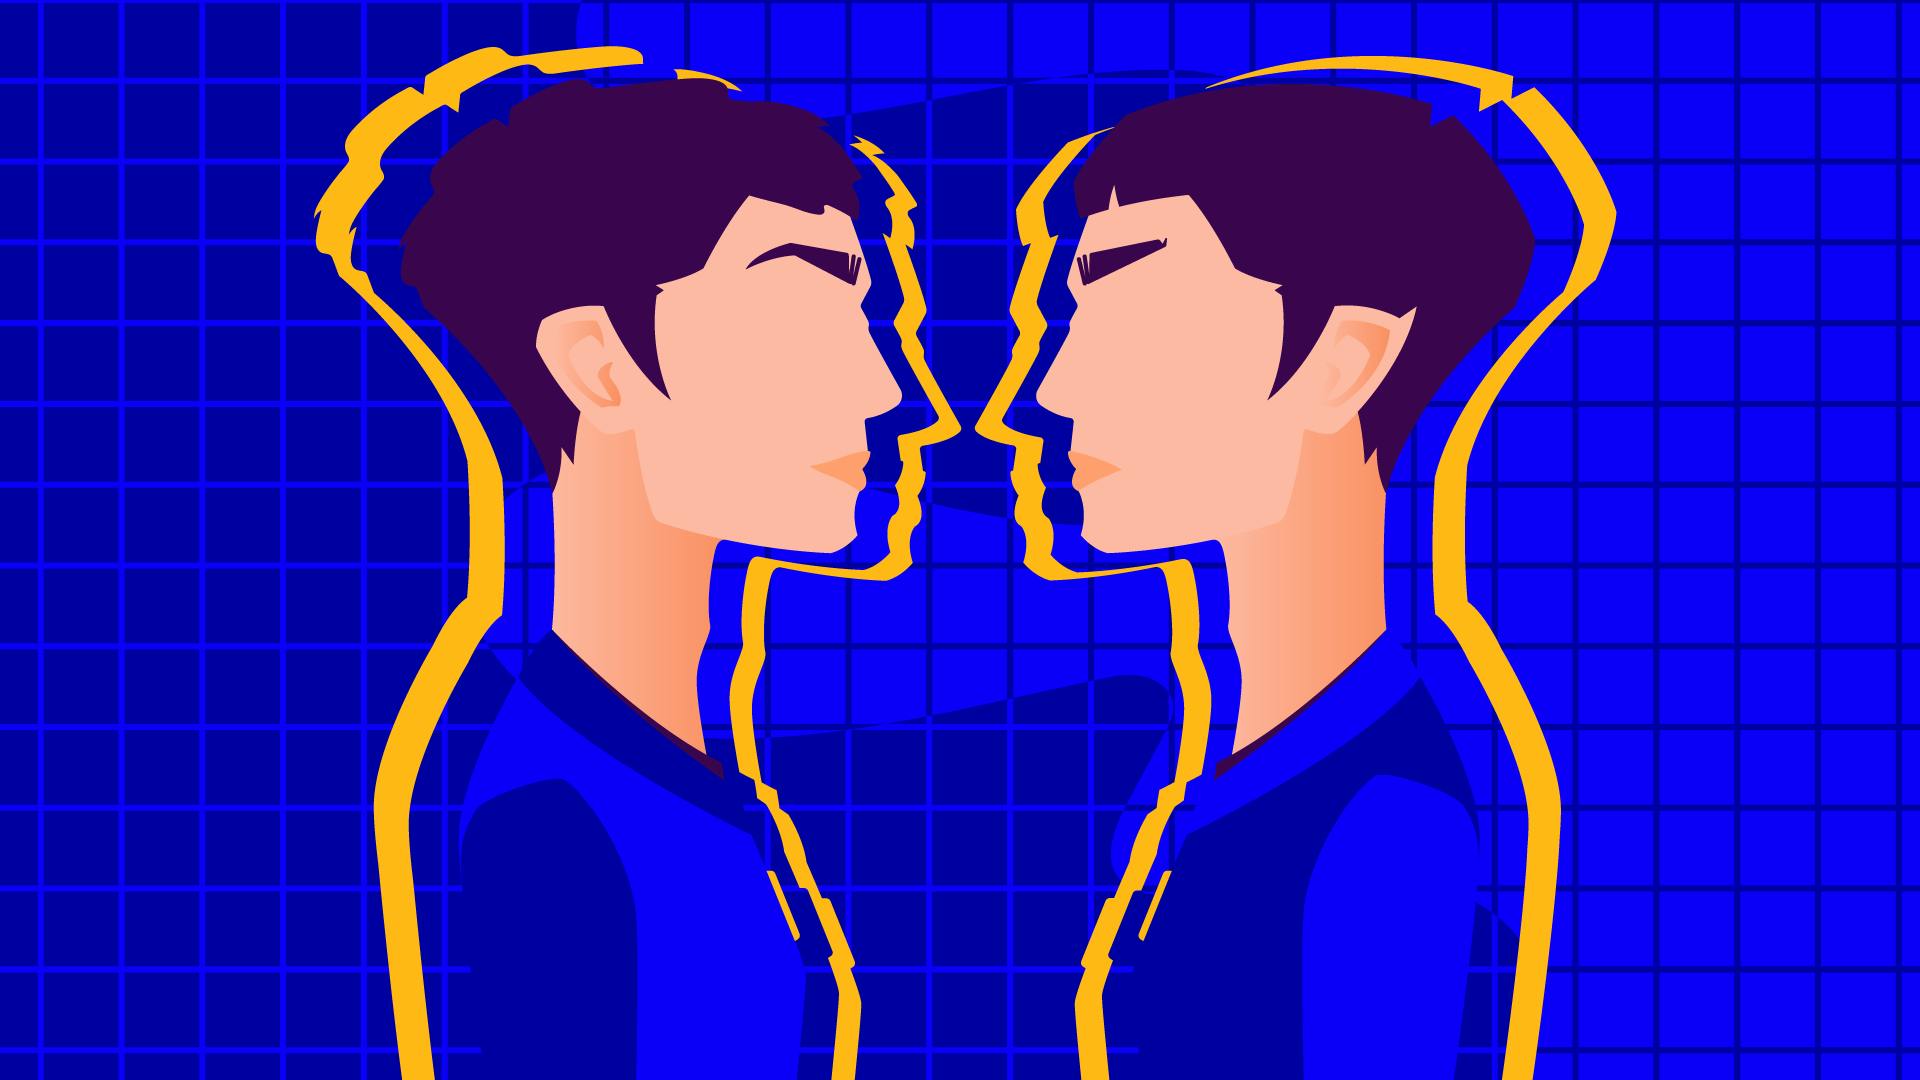 Illustrated graphic of a human version of Spock standing face-to-face with the Vulcan version of Spock